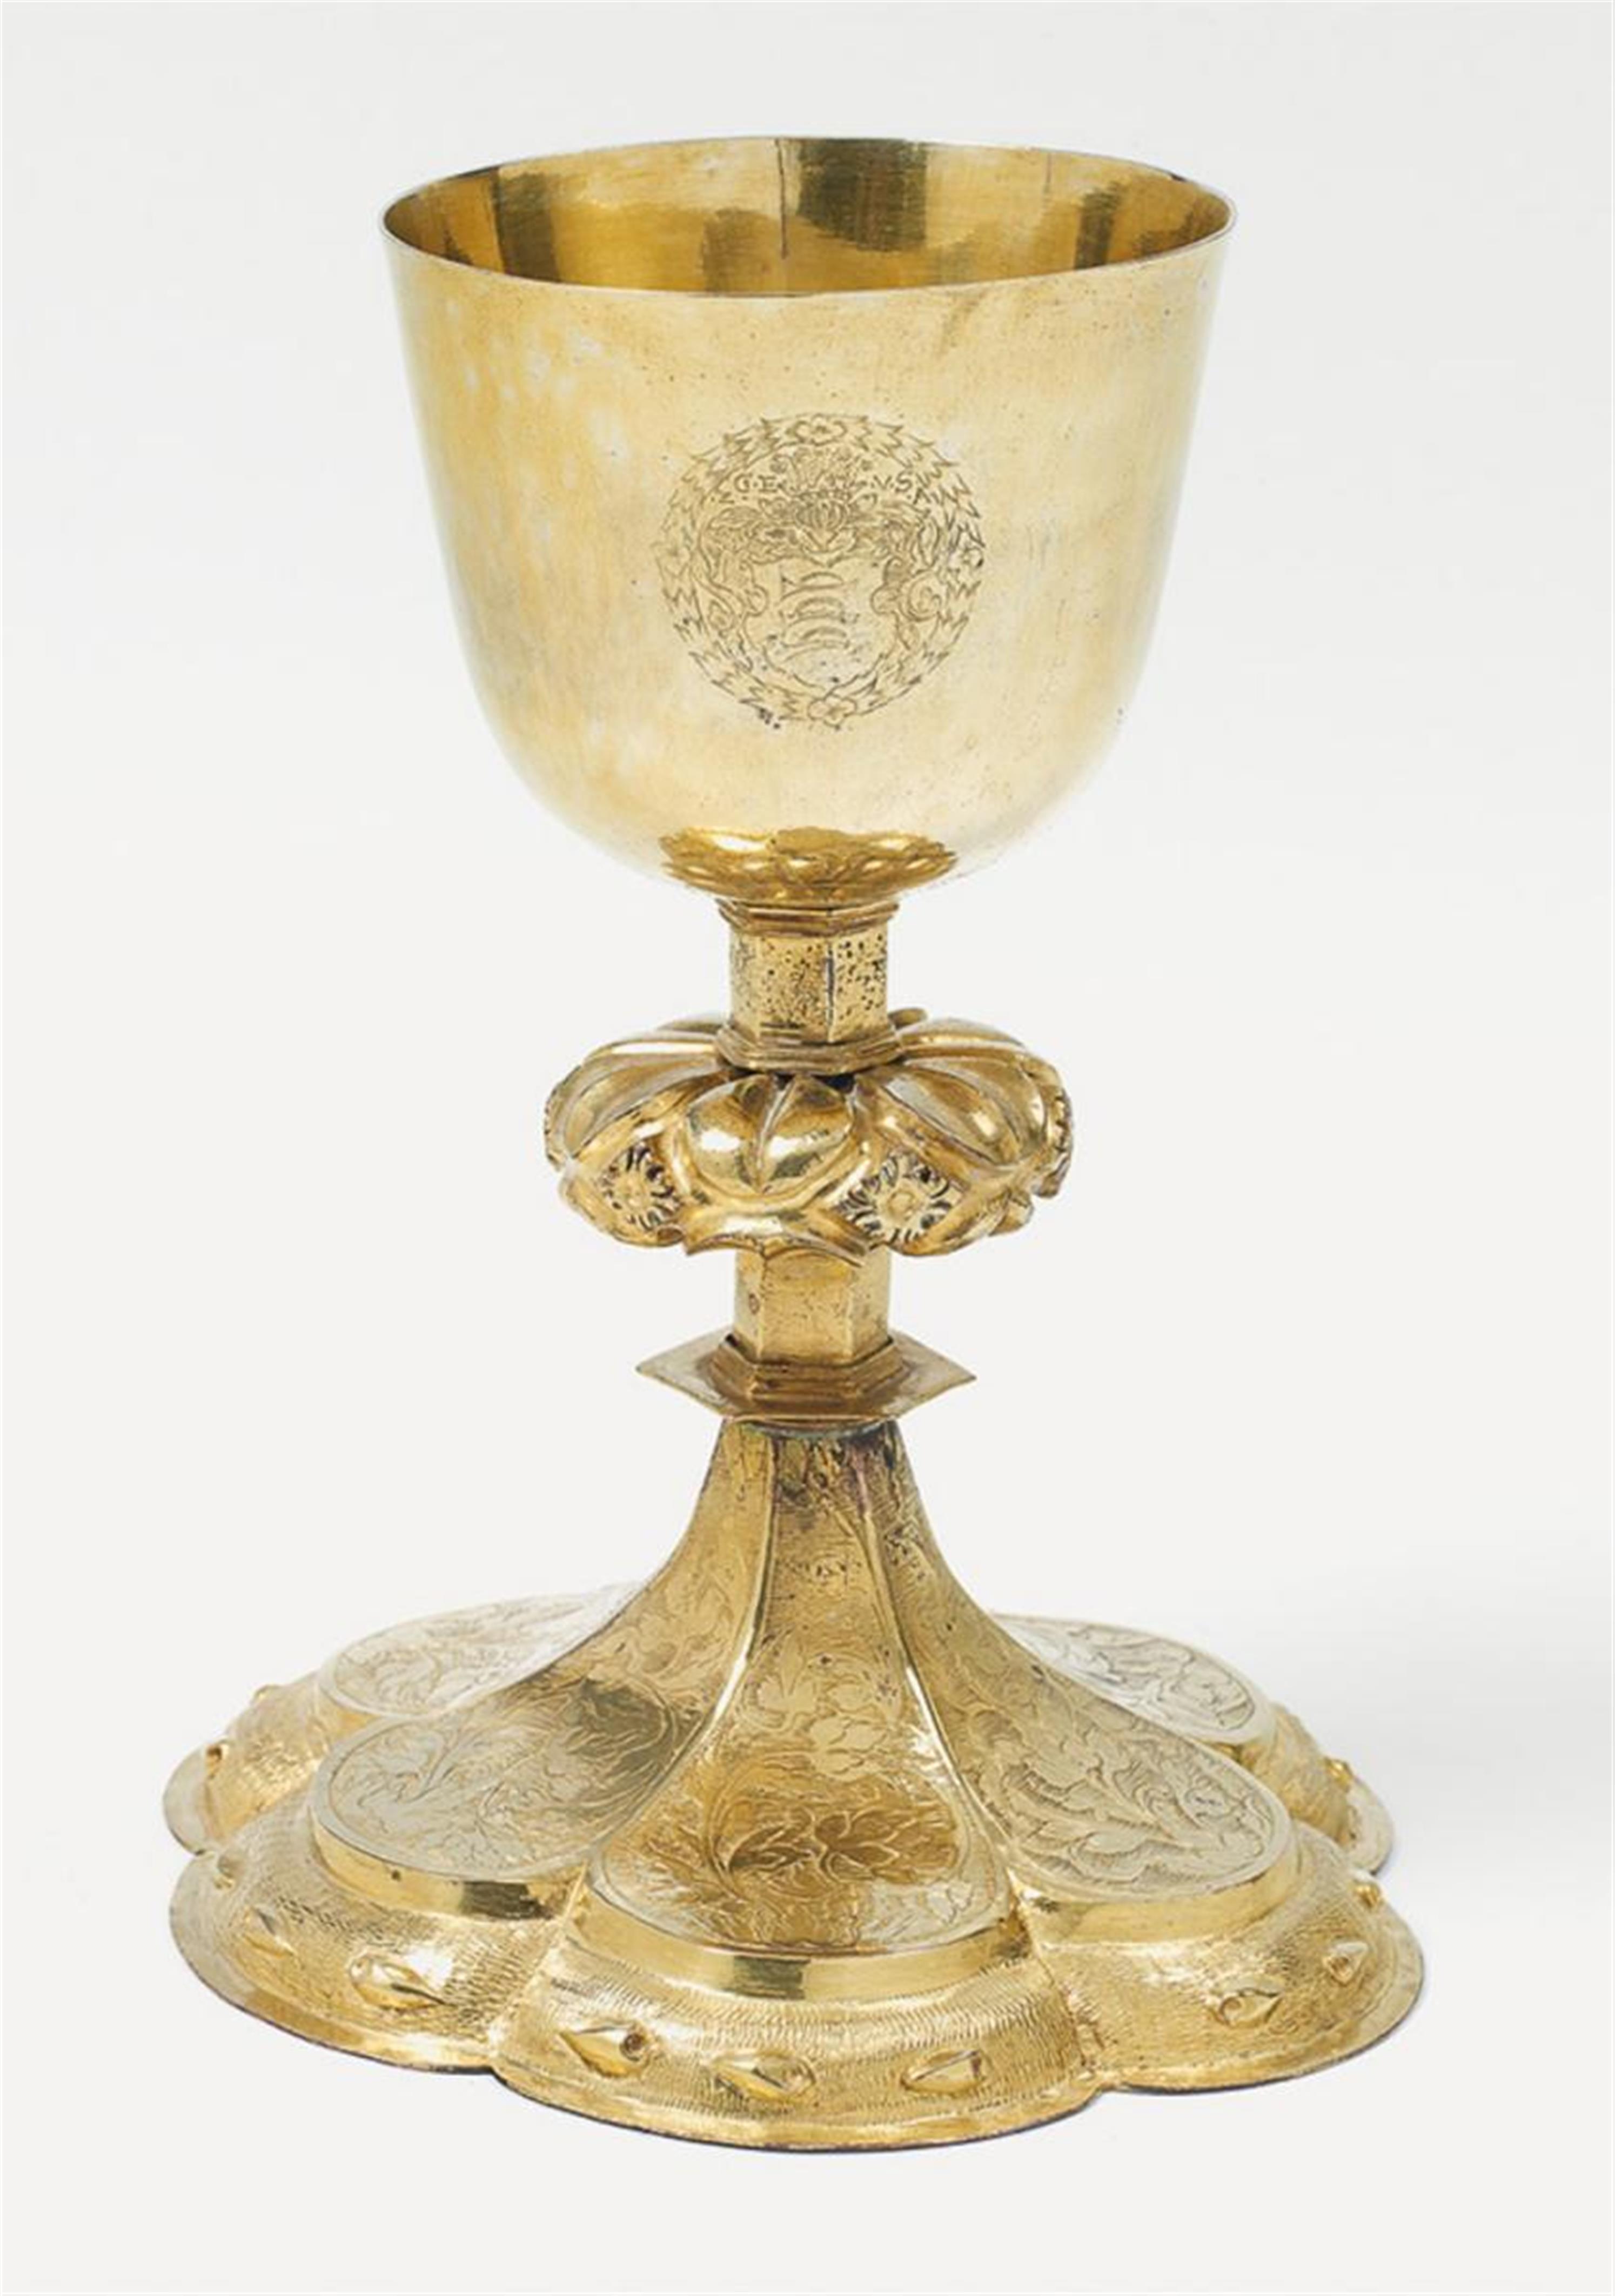 A gilt copper communion chalice. Engraved with the arms of the Scheyer family and monogrammed "GEvSzA". Probably Carniola, present day Slovenia, 17th C. - image-1